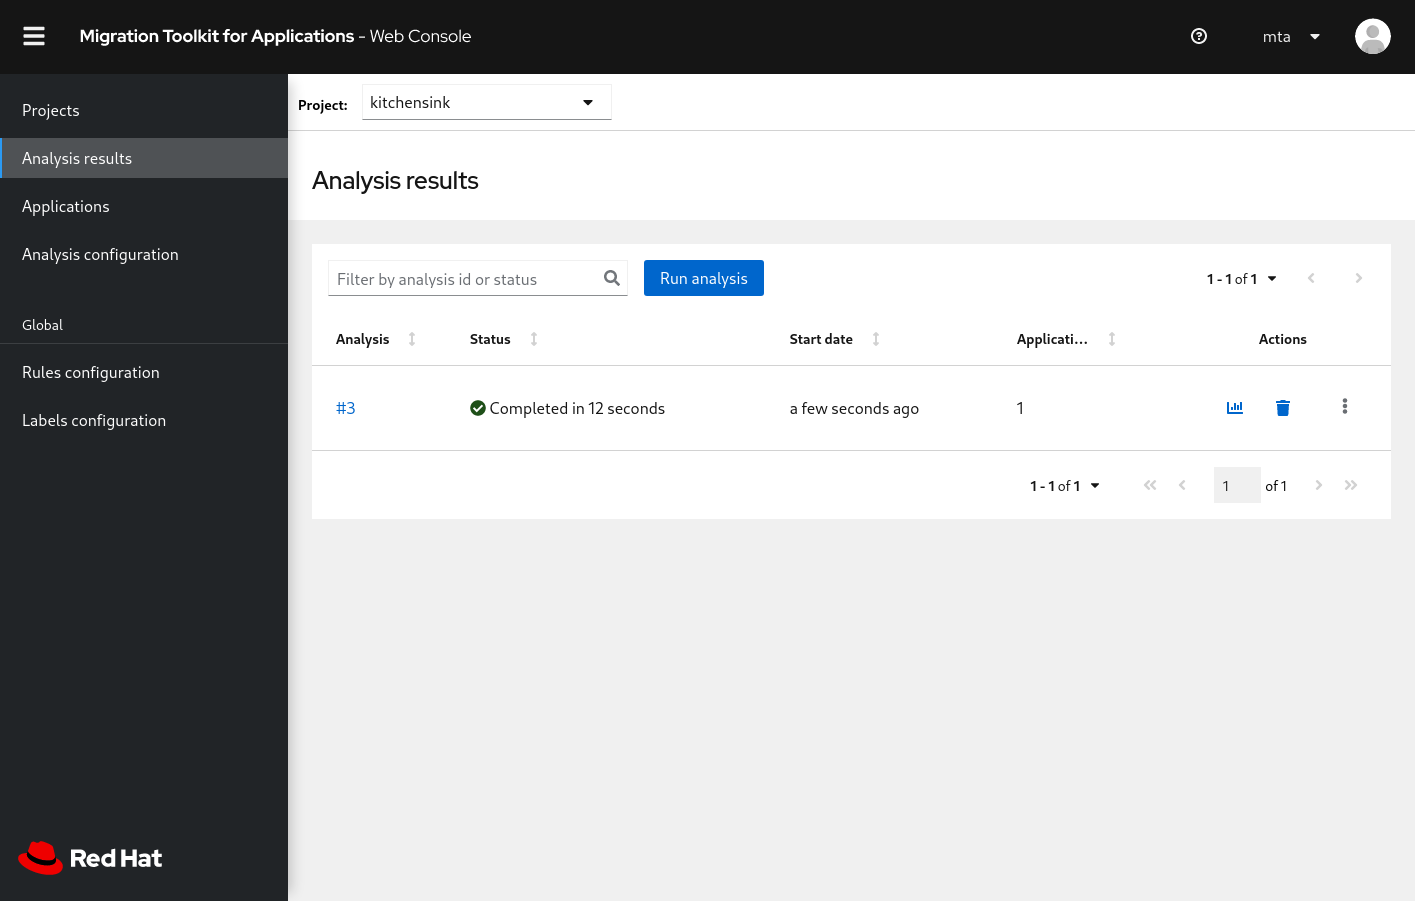 After you run the analysis, the Analysis Results page offers a report.